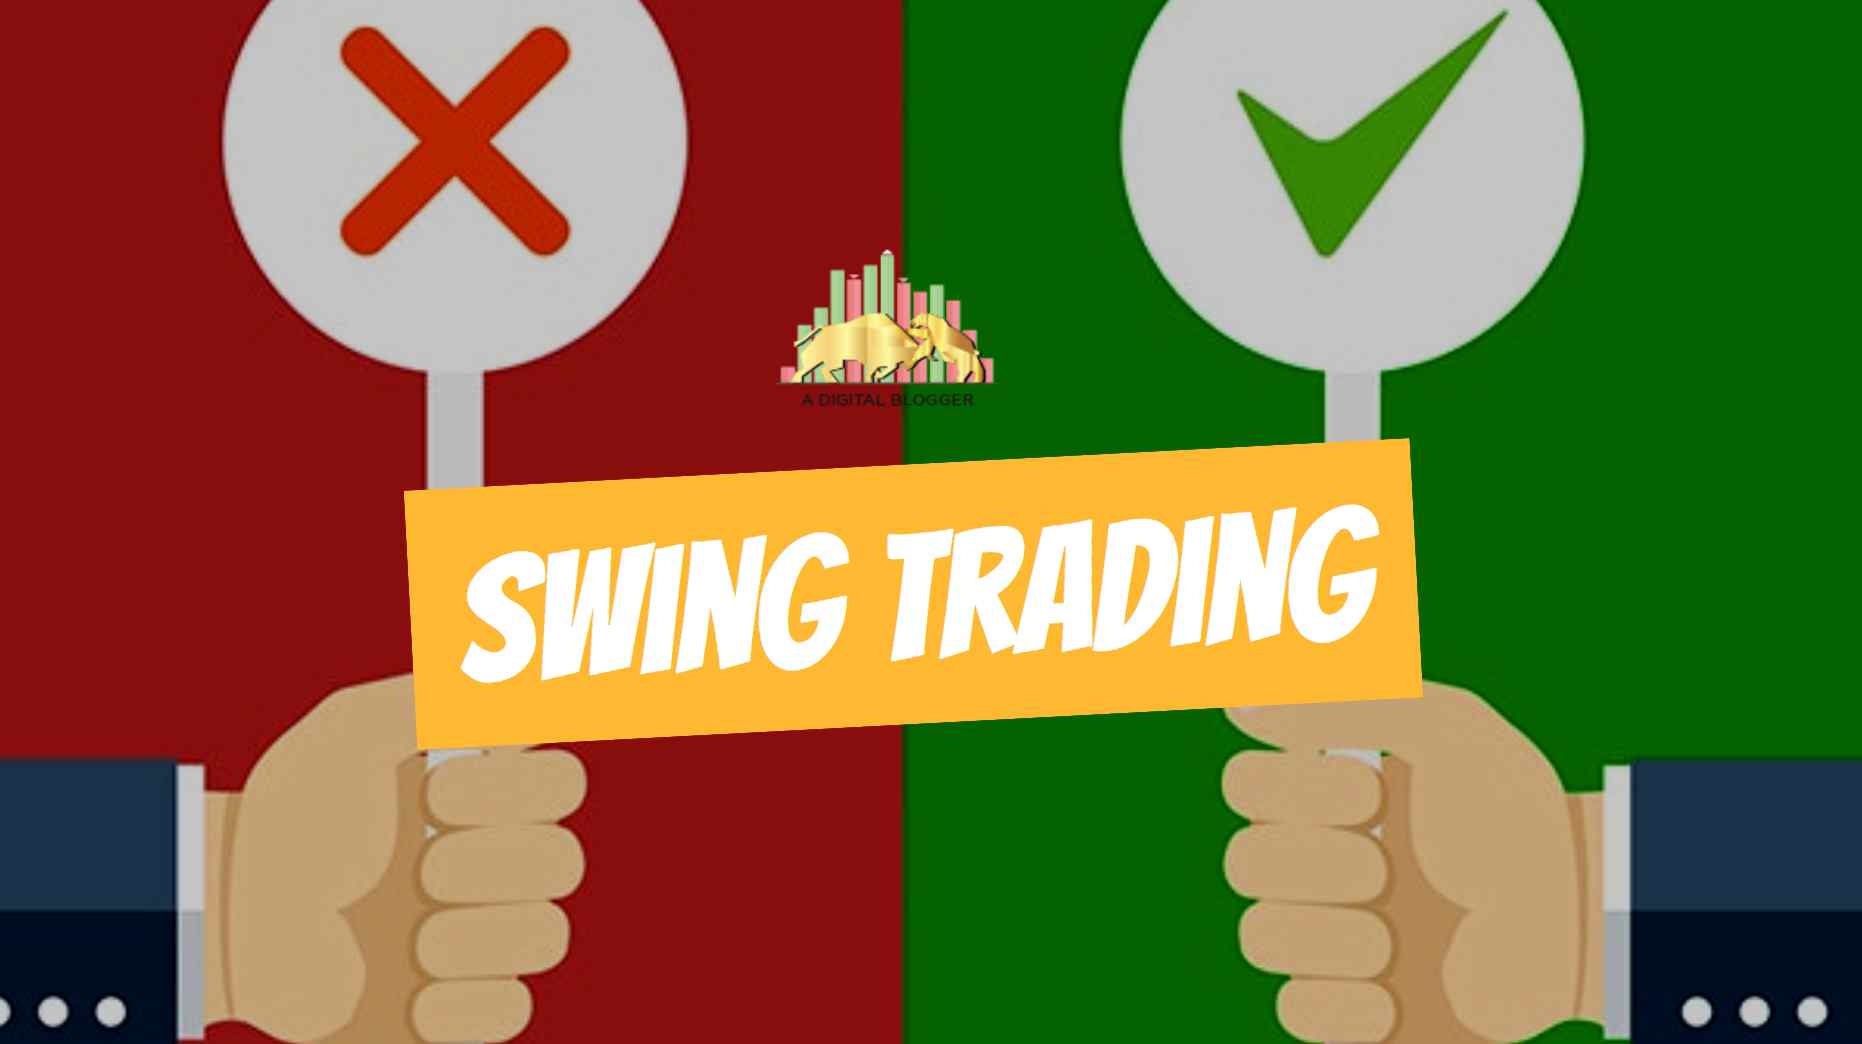 5 Swing Trading Pros and Cons | Problems, Advantages, Risks